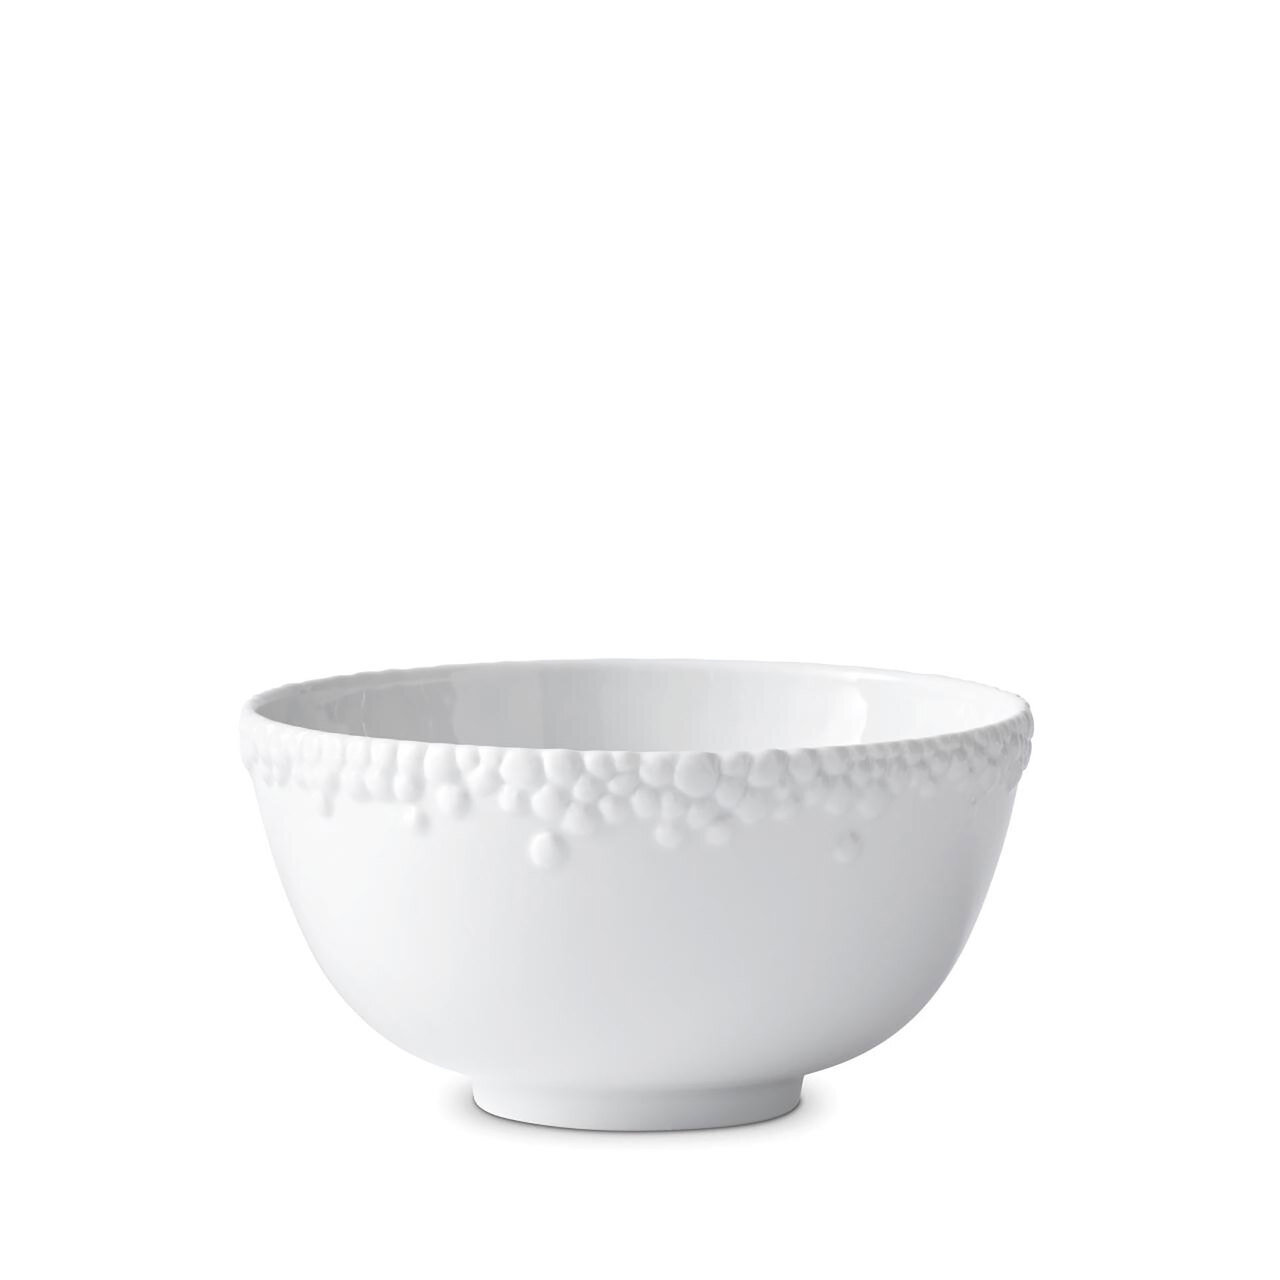 L'Objet Haas Mojave Cereal Bowl White HB135